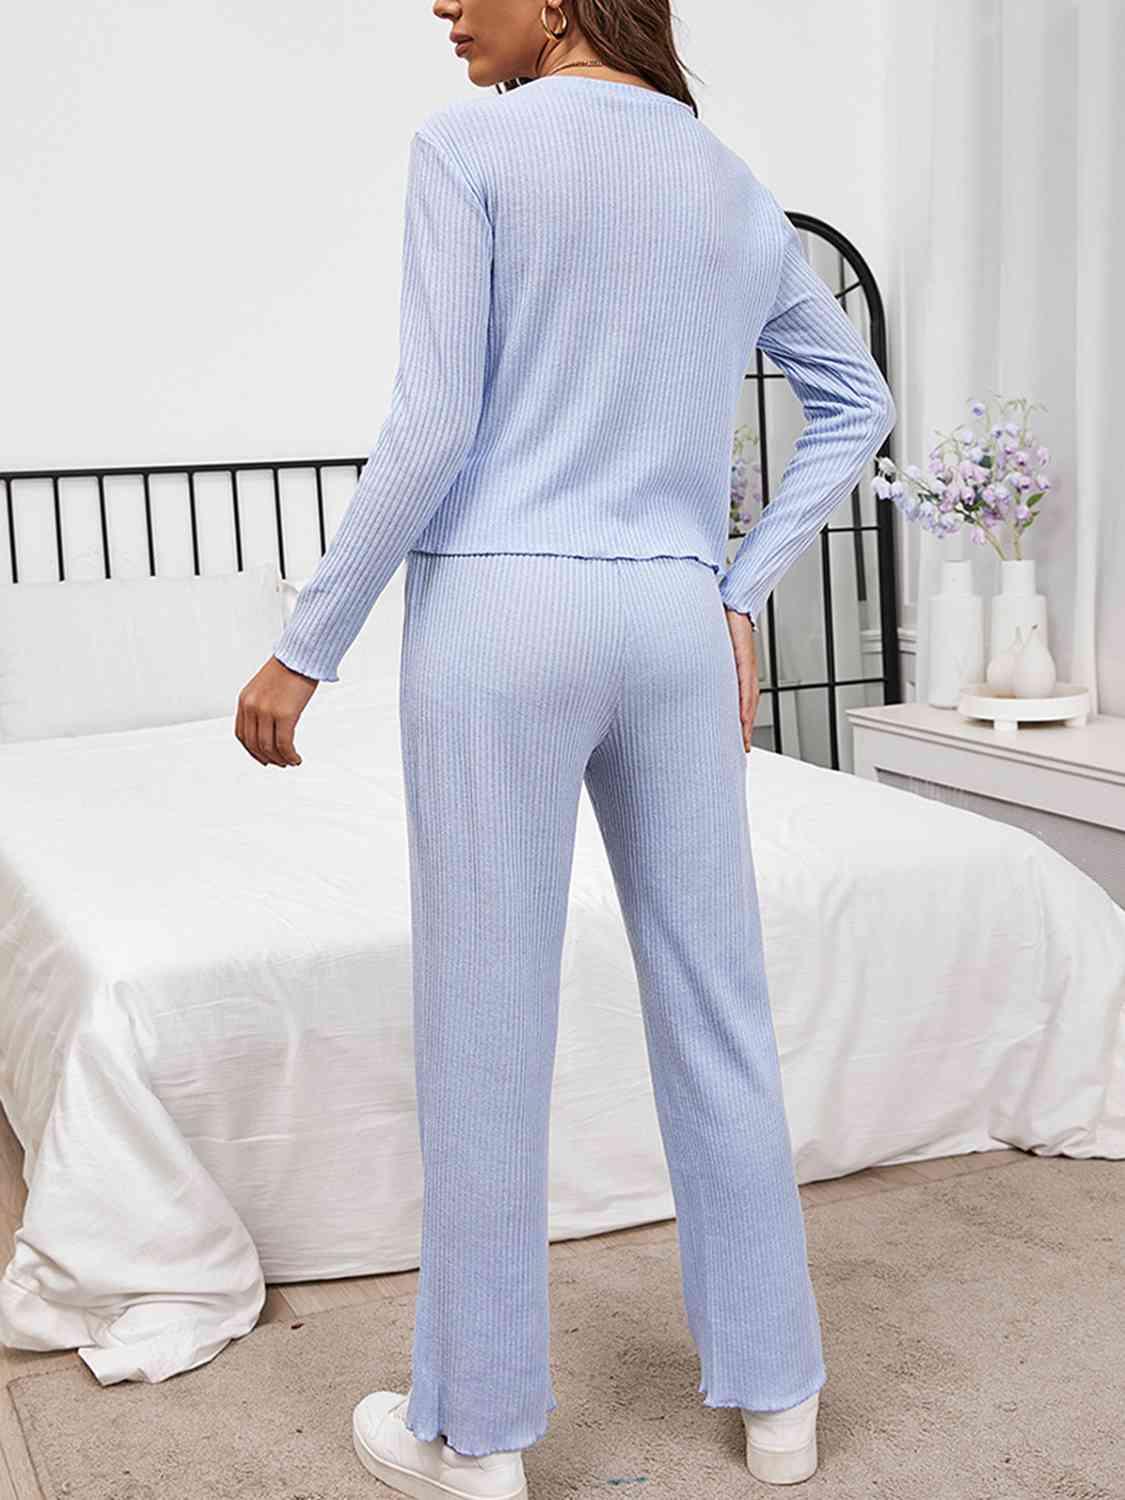 a woman in a blue sweater and pants standing in front of a bed